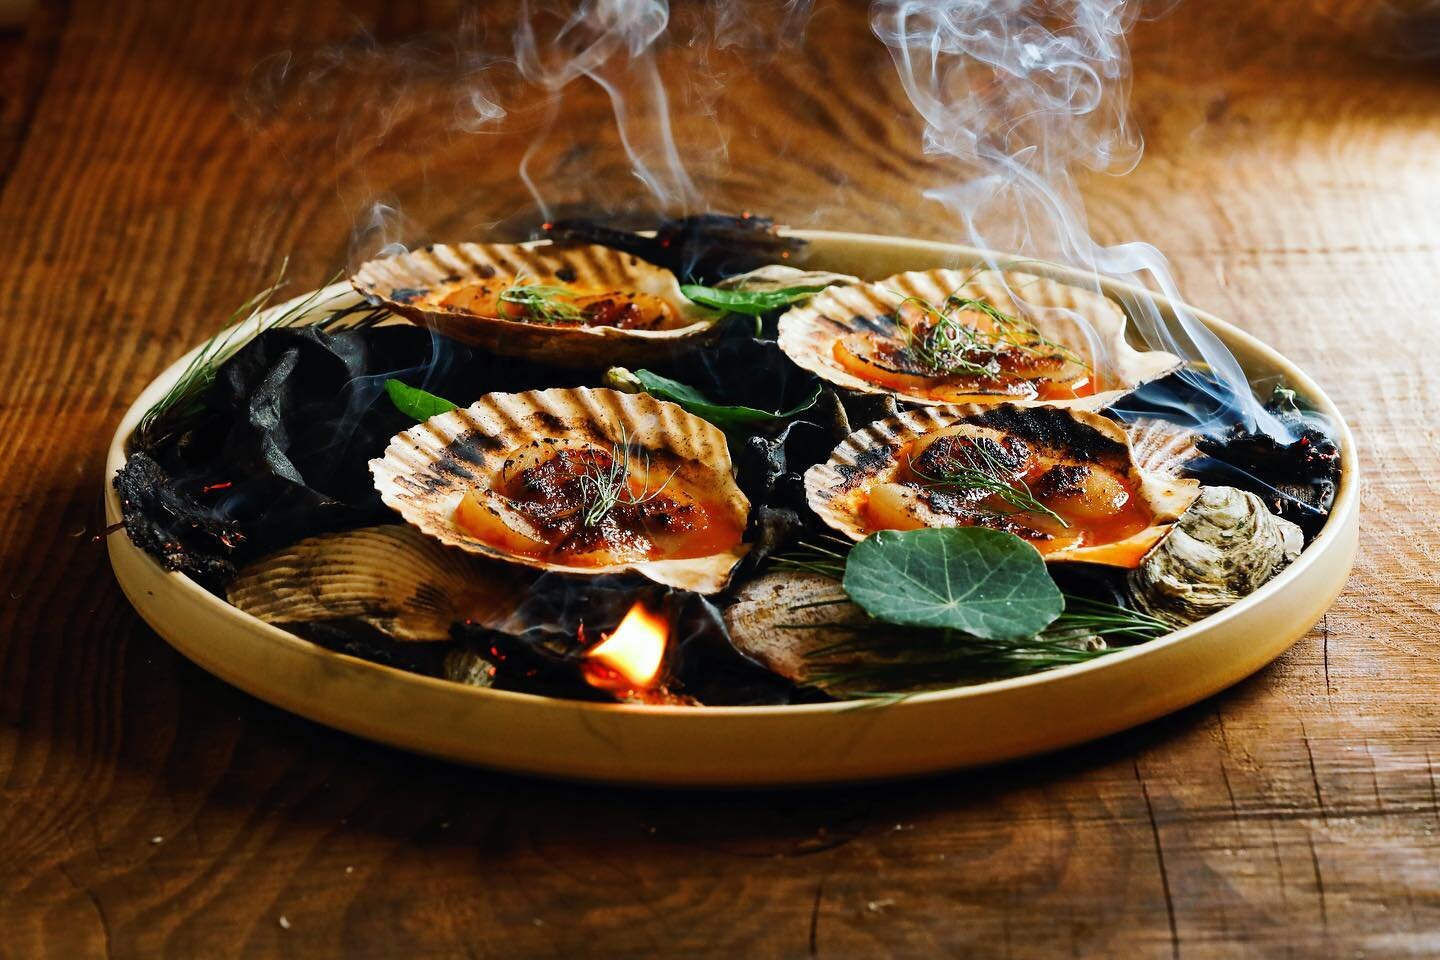 A new season begins ❄️//

We like fire + things from the sea, including these rich abrolhos scallops from the cooler months of last year.